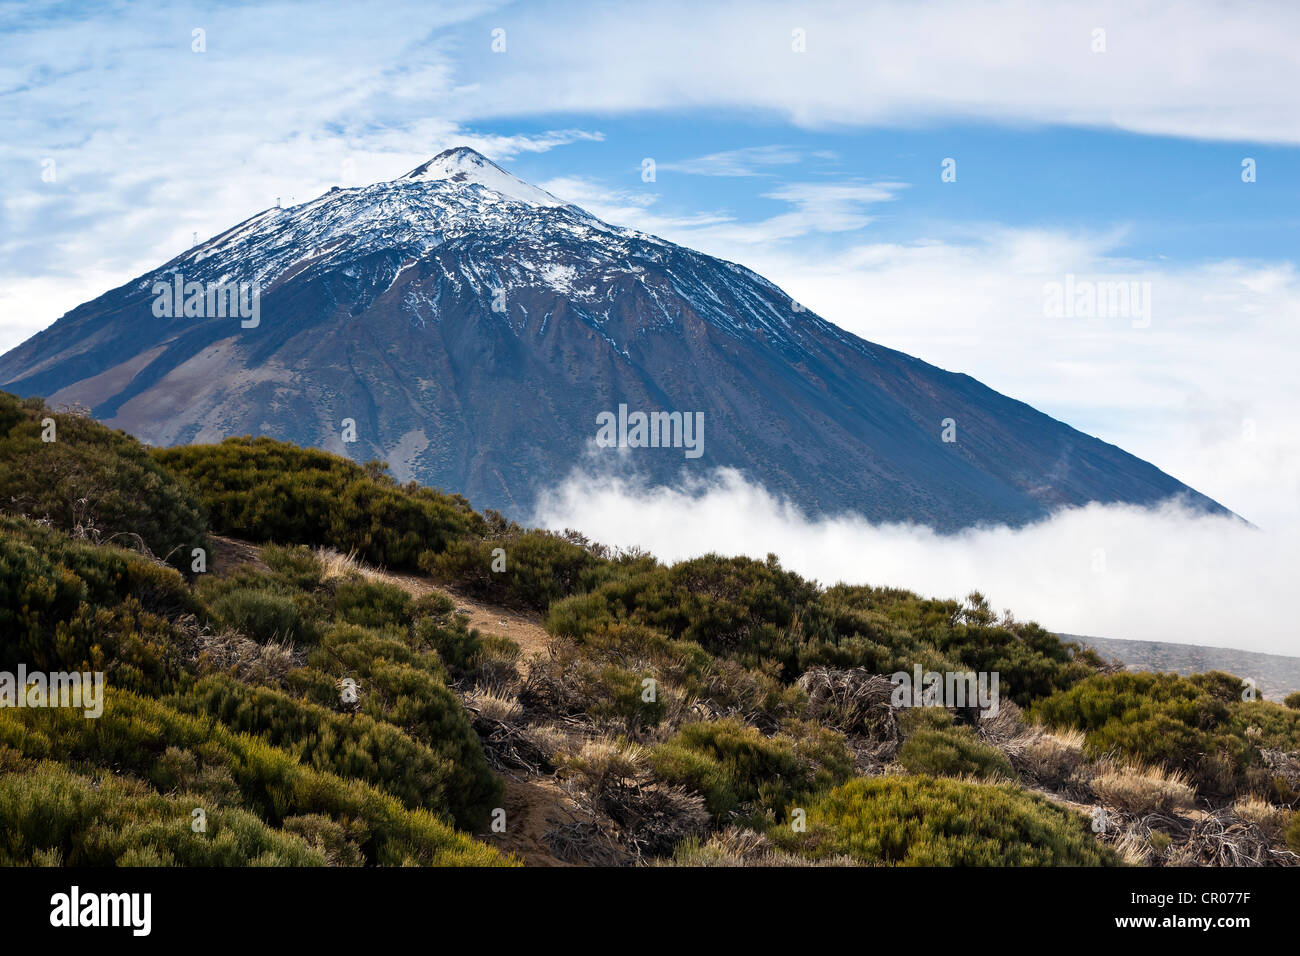 View of the Pico del Teide mountain, Tenerife, Canary Islands, Spain, Europe Stock Photo